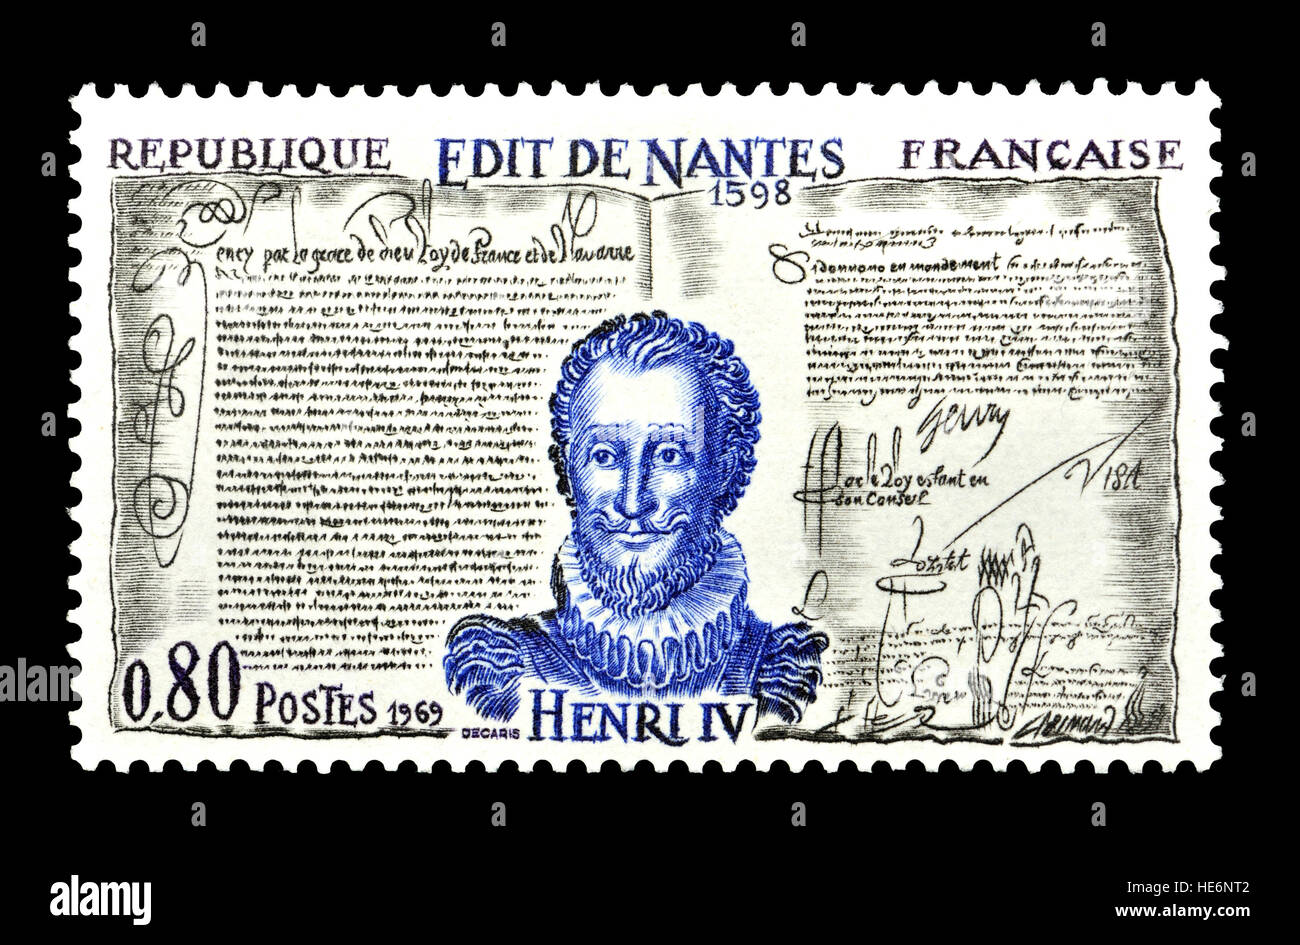 French postage stamp (1969) : Edict of Nantes / Edit de Nantes. Signed 1598 by King Henry IV of France, granted the Calvinist Protestants of France (. Stock Photo